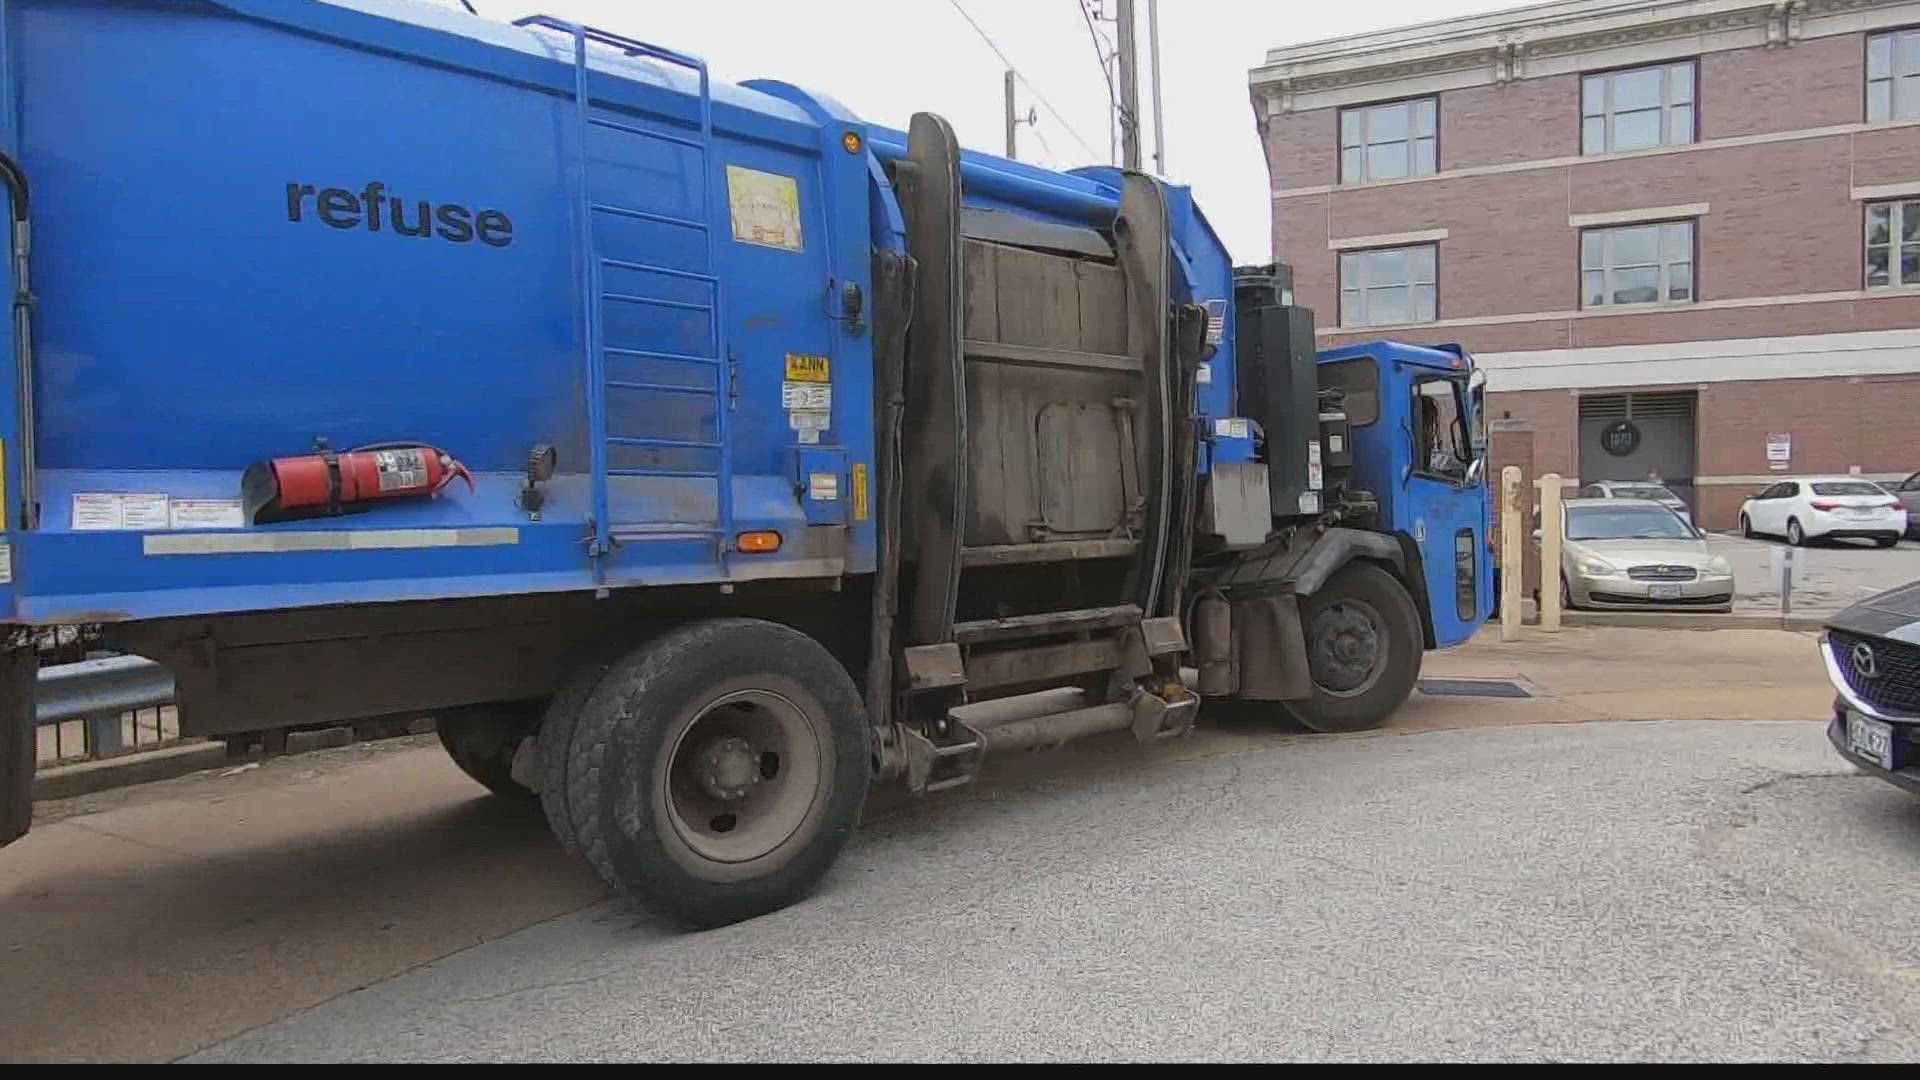 In the past few months, the trash and recycling were getting combined. We're told a big reason why the service had to stop, was a labor shortage.